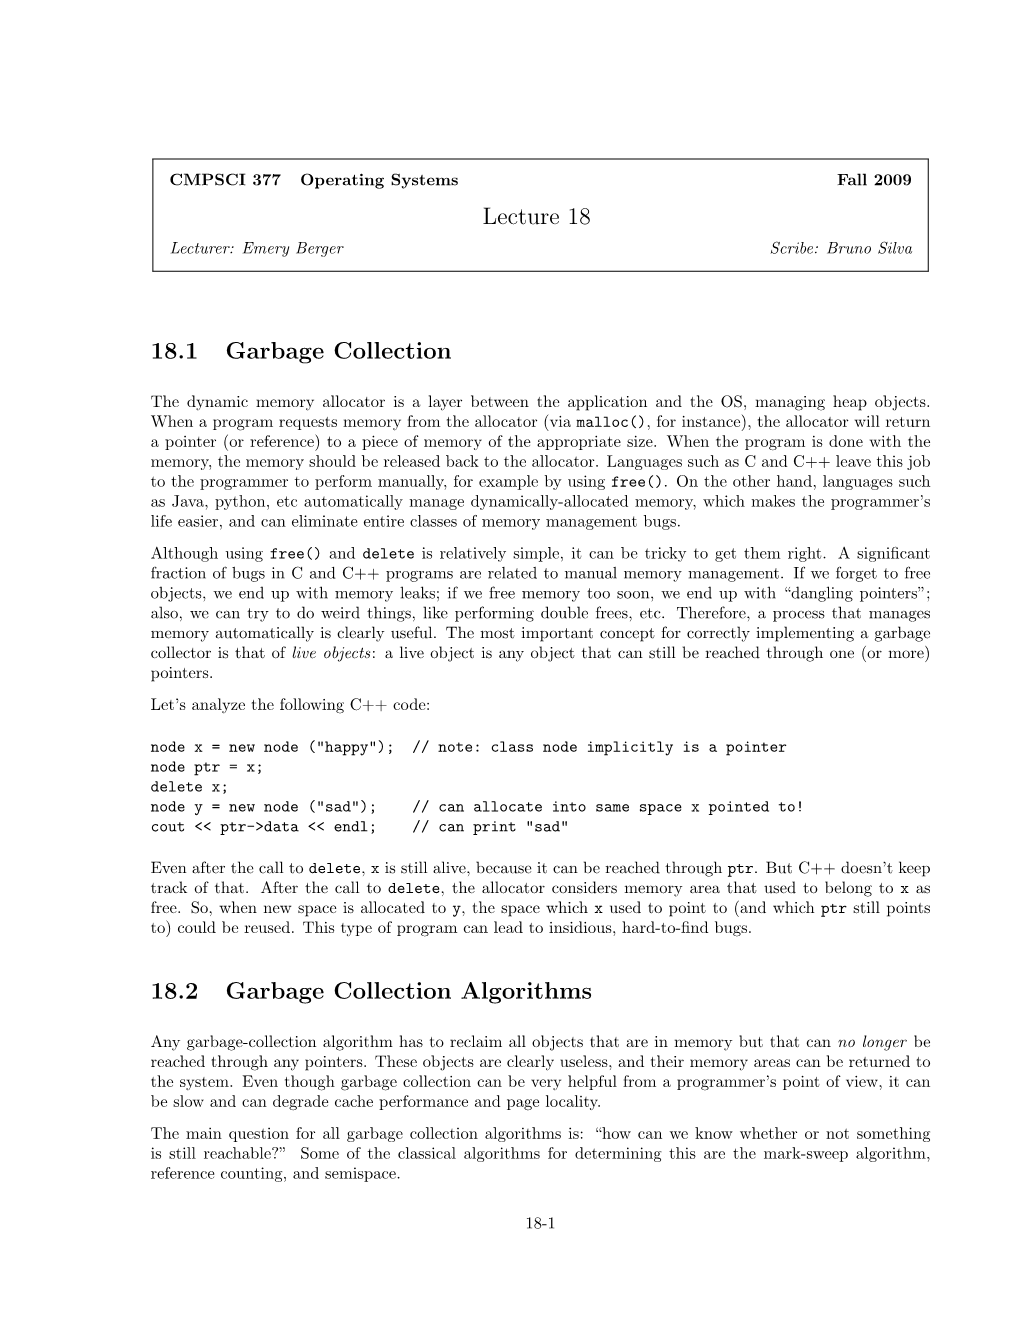 Lecture 18 18.1 Garbage Collection 18.2 Garbage Collection Algorithms